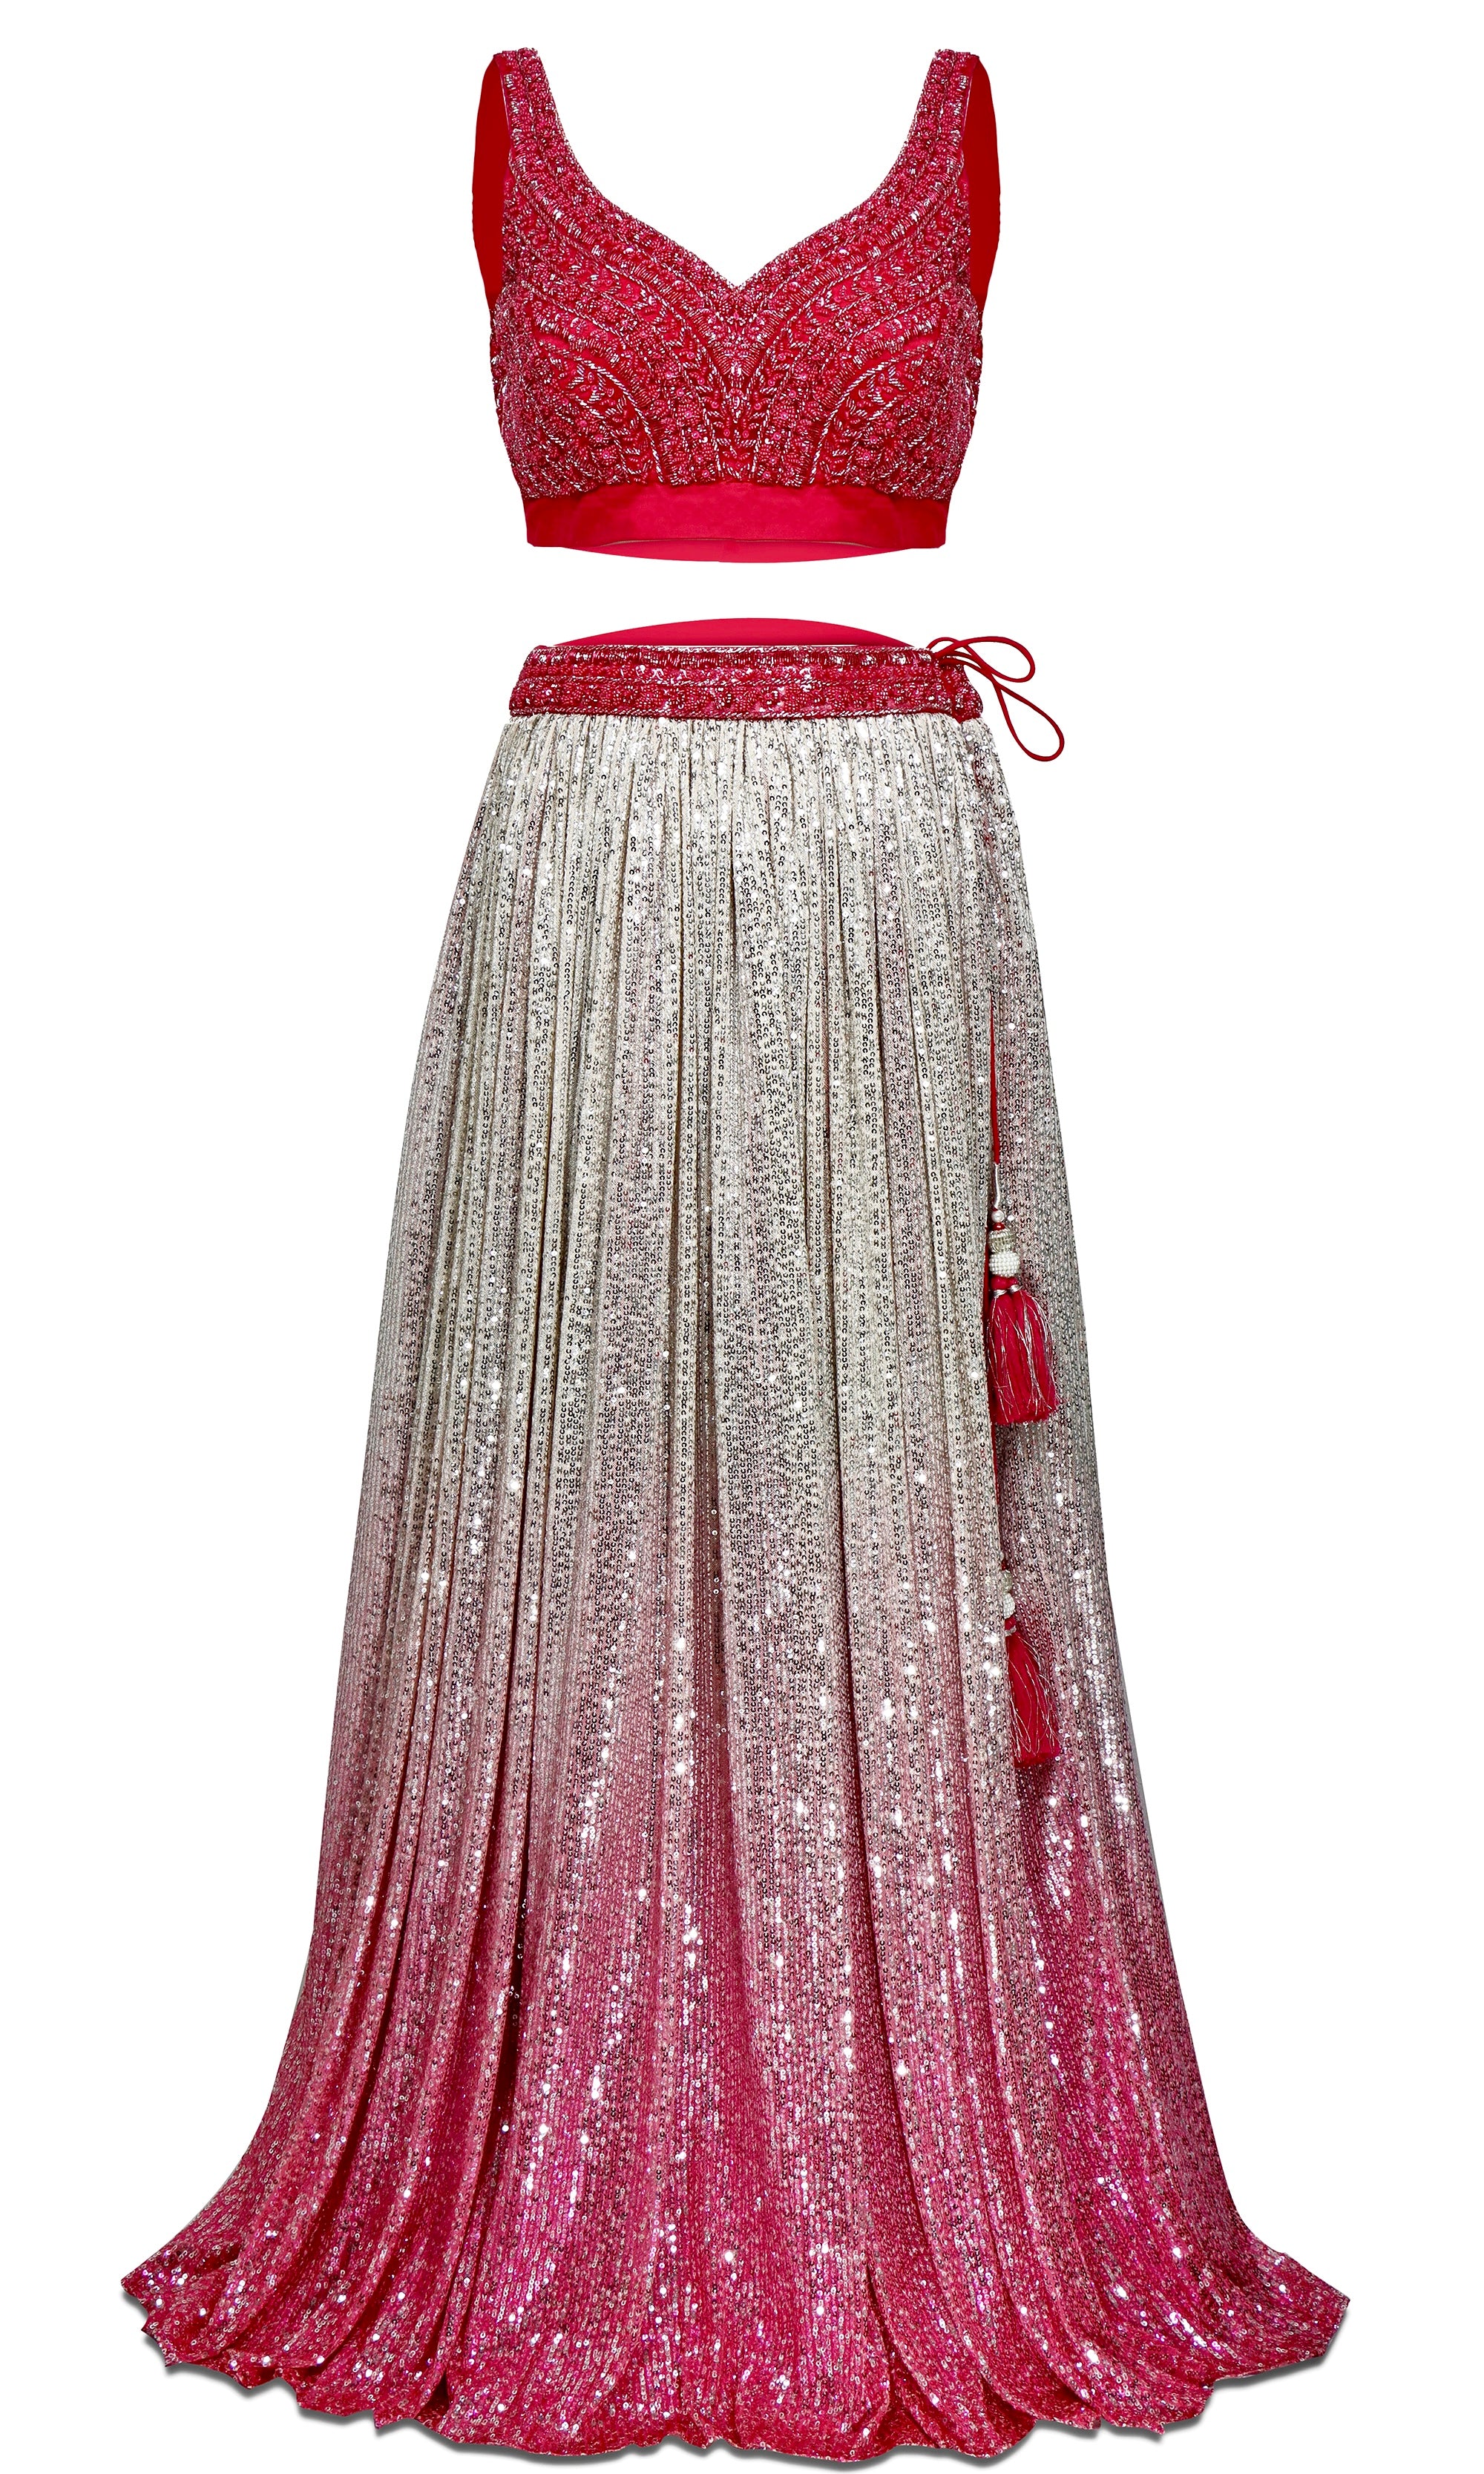 Hot pink & silver ombre Lehenga embellished with glittering sequins, has sleeveless crop top